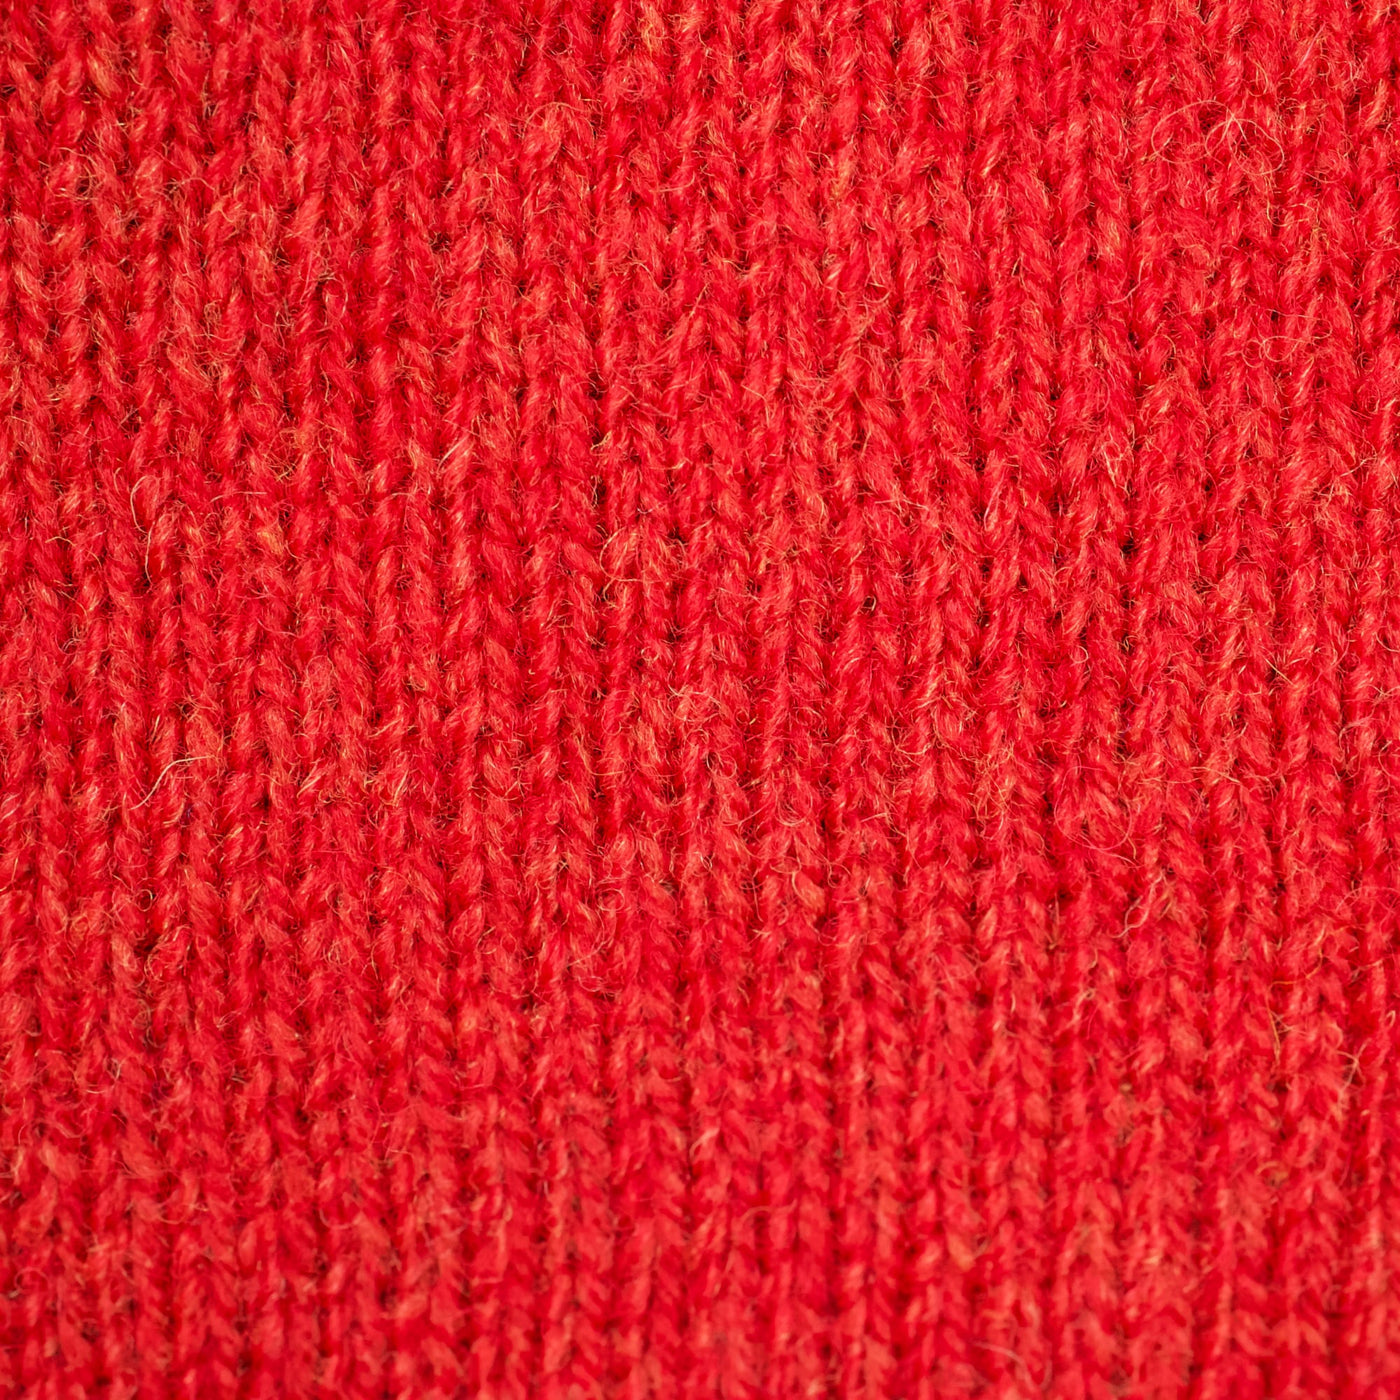 Supersoft Seamless Crew - Scarlet